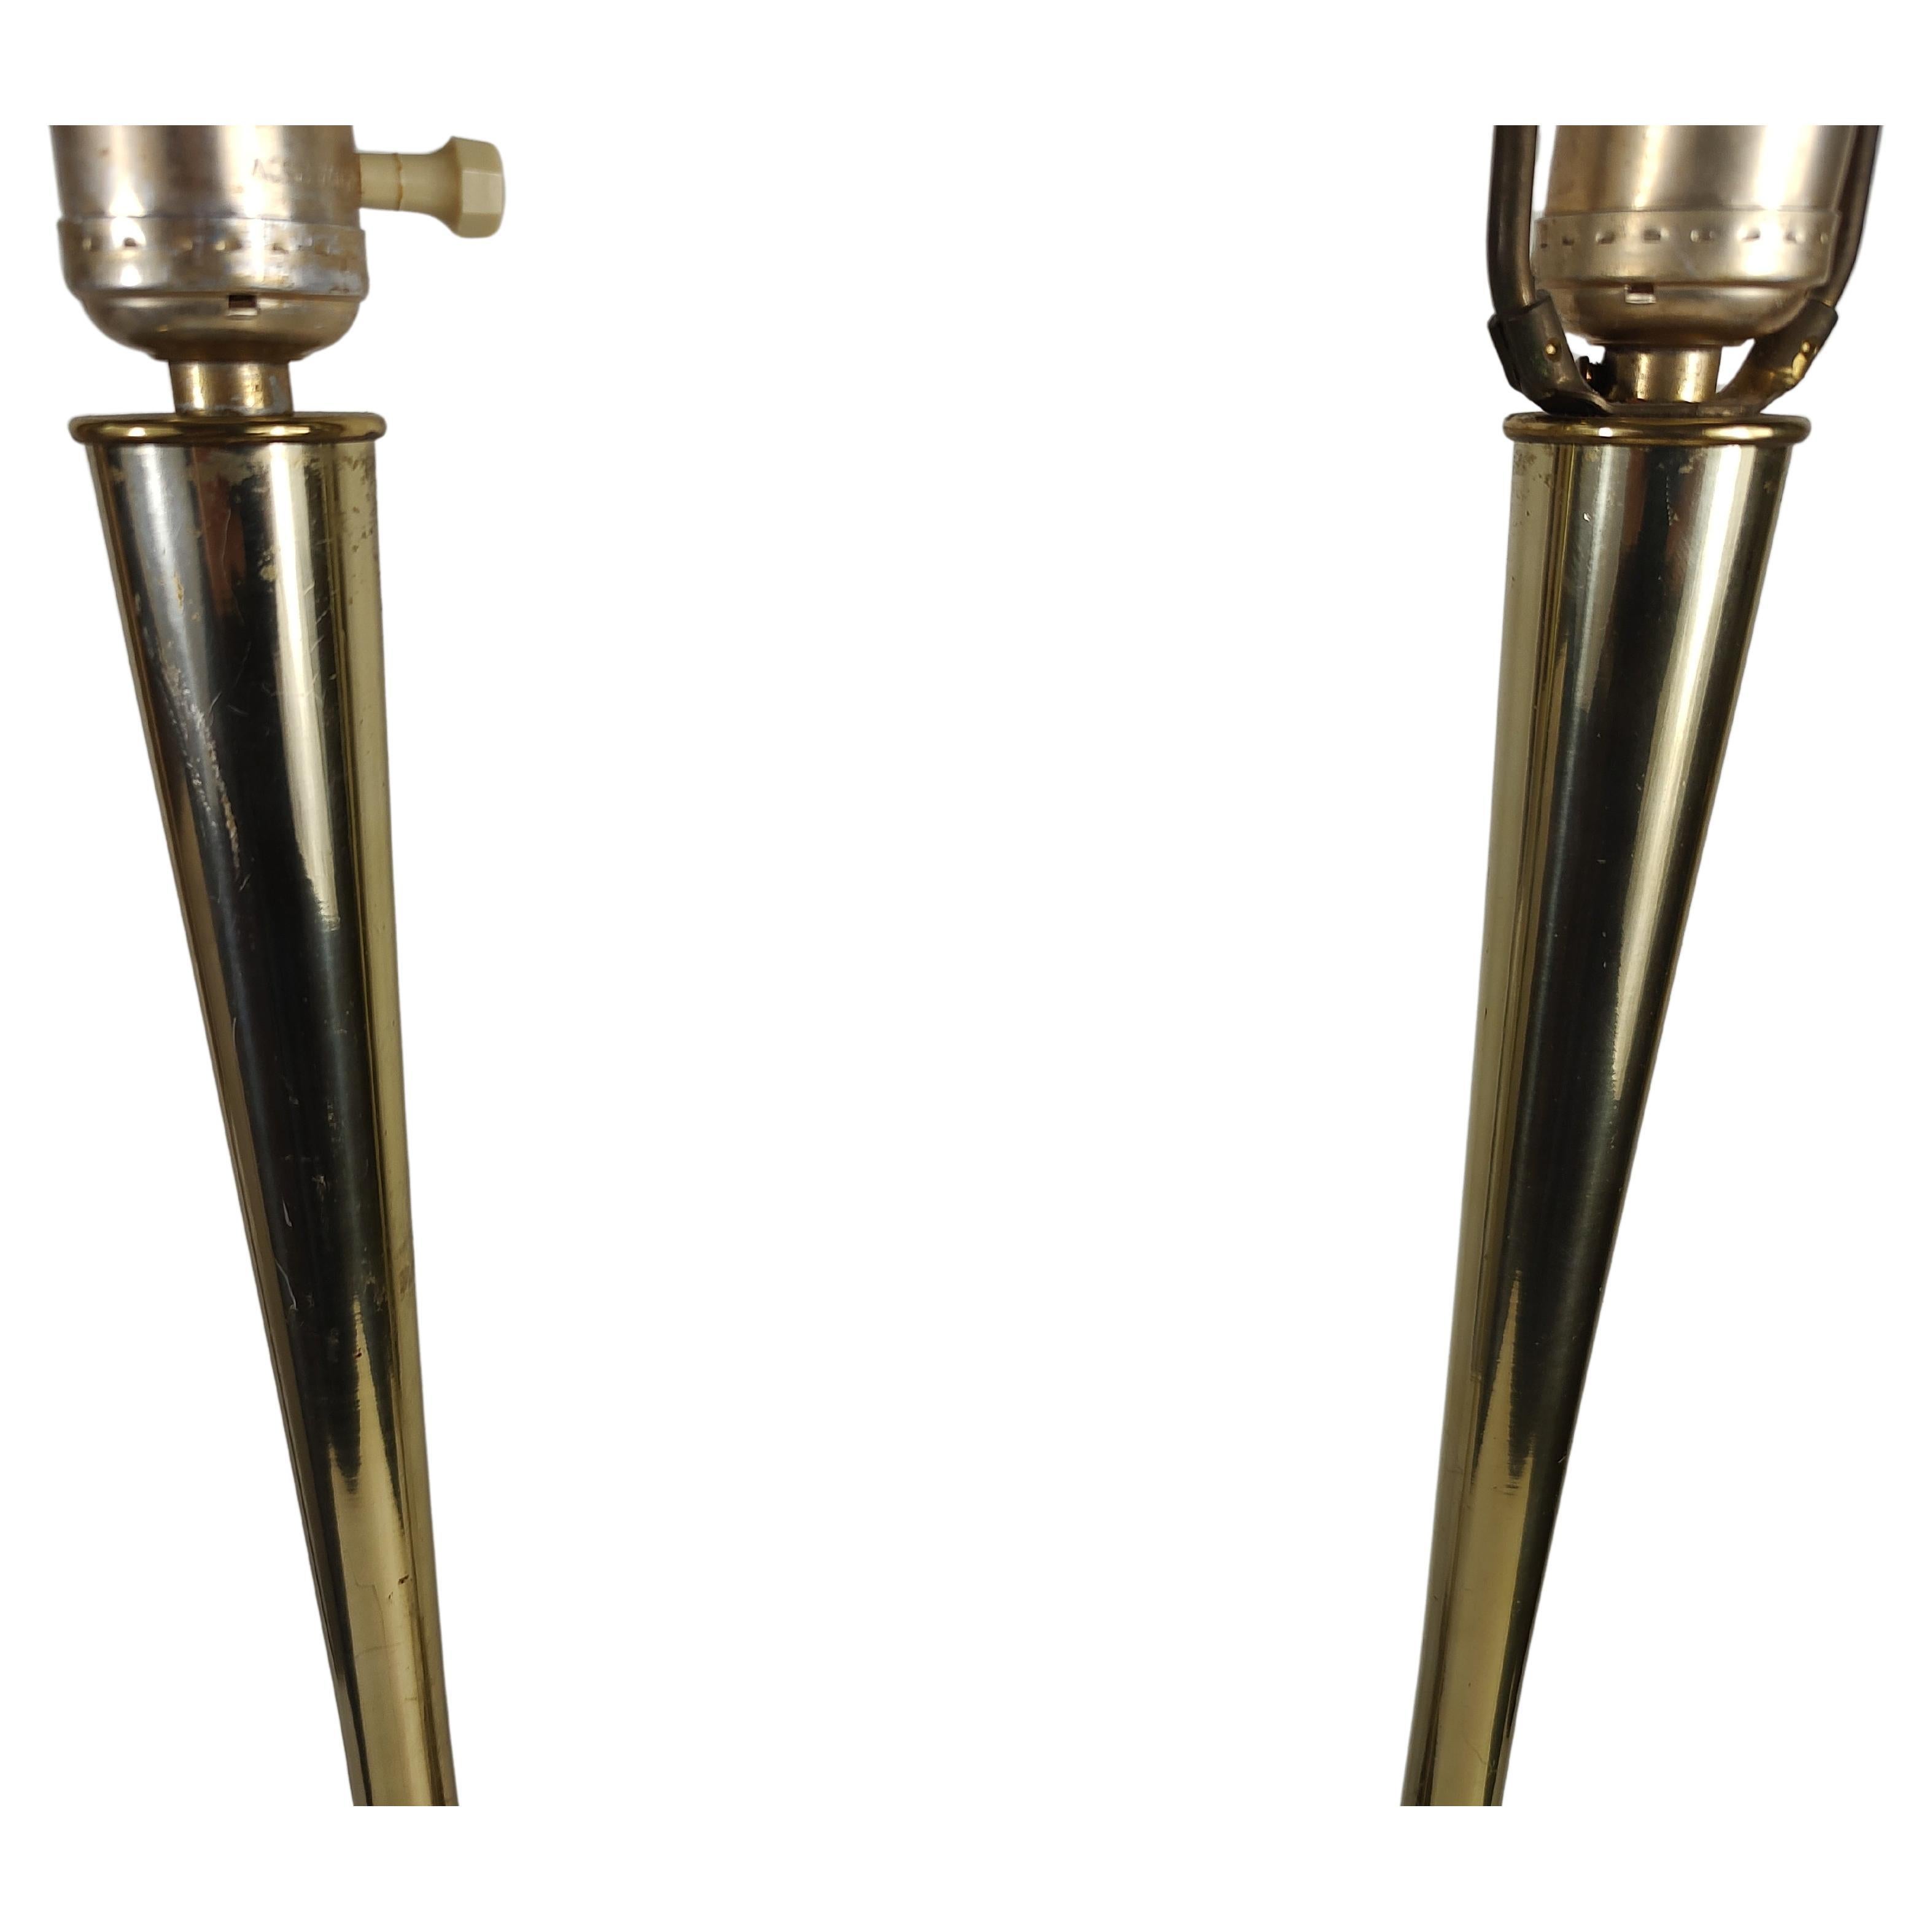 American Pair of Tall Walnut & Brass Mid-Century Modern Table Lamps attrib Laurel Lamp co For Sale